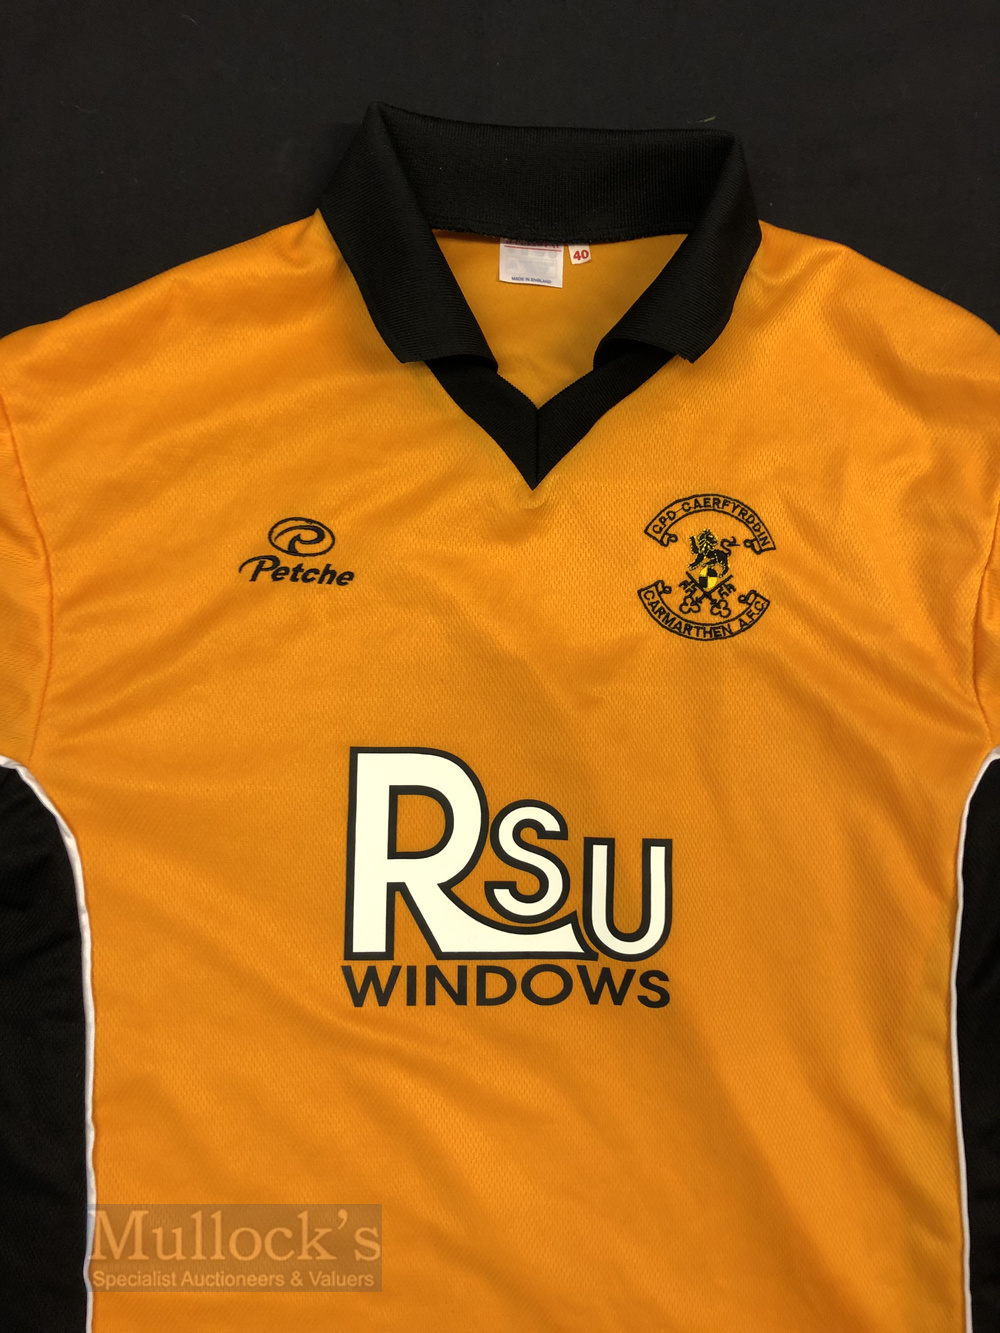 Carmarthen Town AFC Home football shirt size 40”, long sleeve, black and gold colour, MG Sports - Image 3 of 3